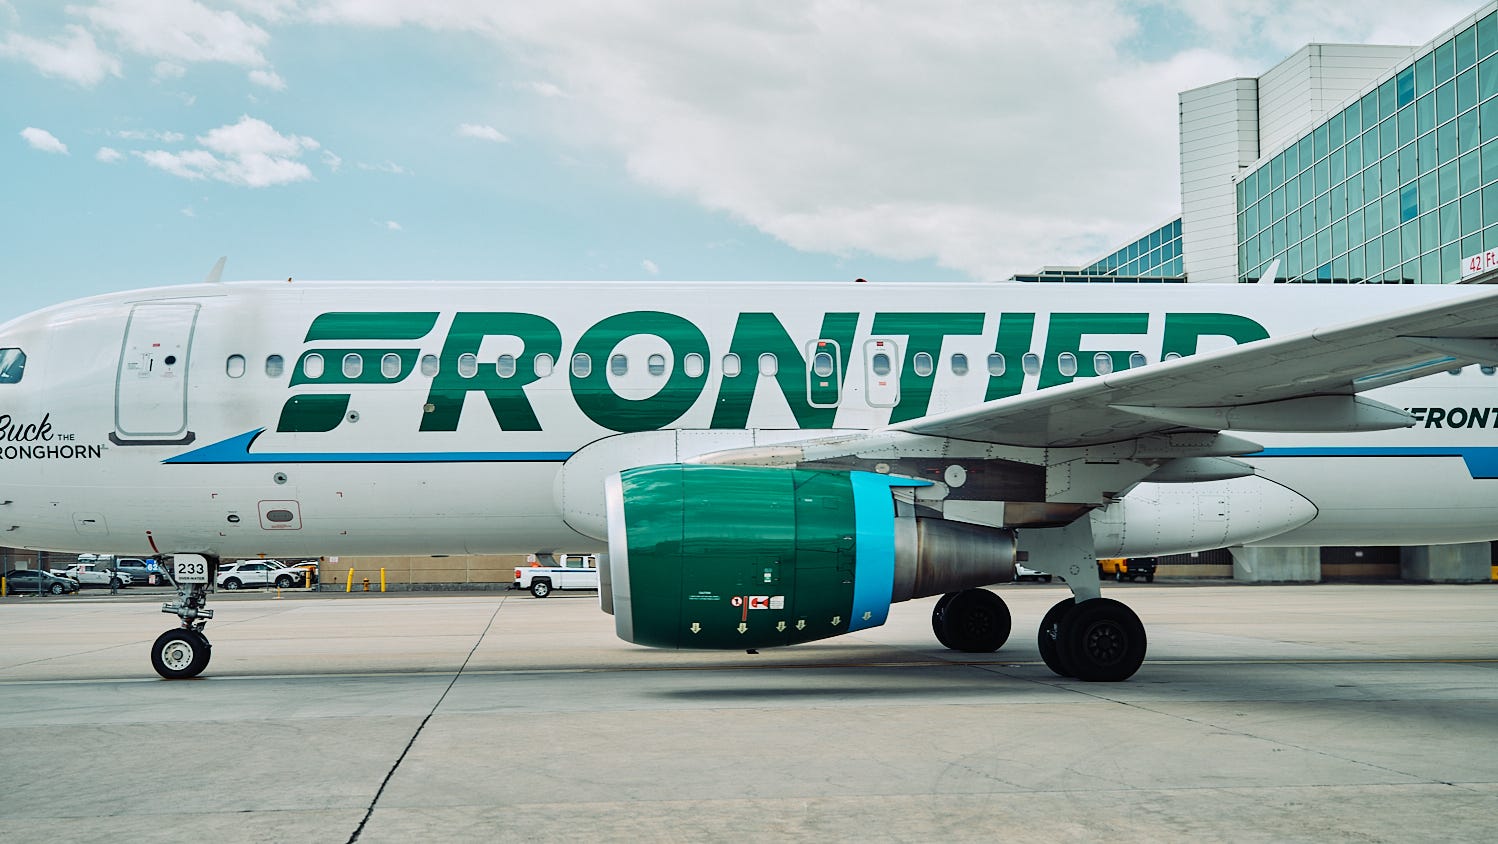  $43 round-trip flights from SC: Frontier offers 1-day sale on Earth Day 